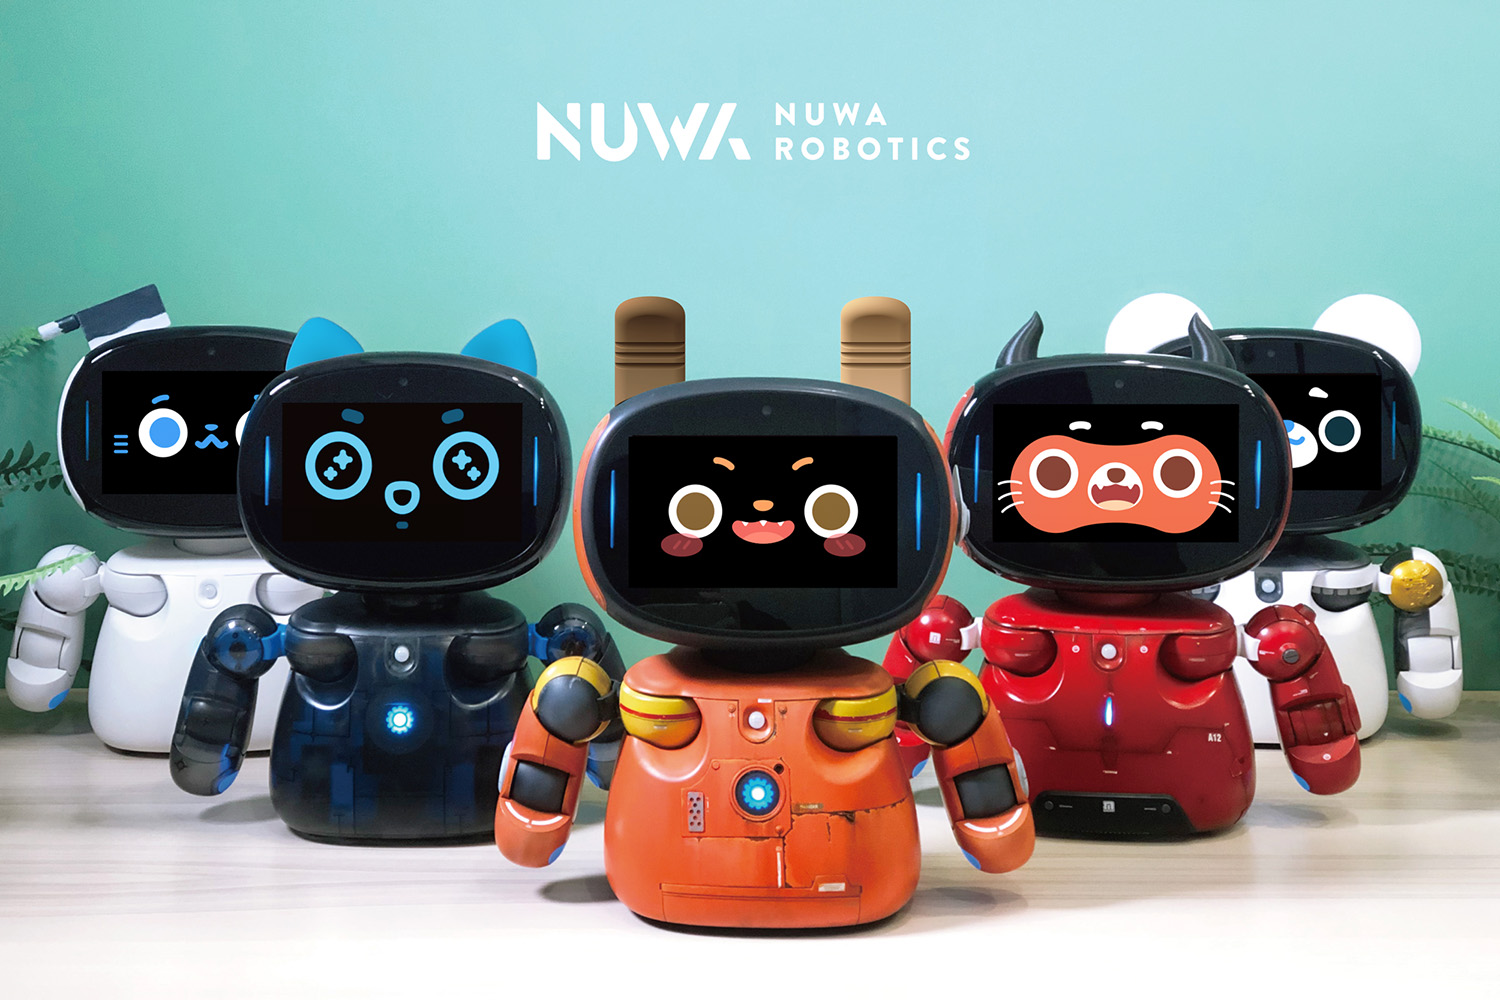 NUWA Robotics Corp., Friday, July 22, 2022, Press release picture